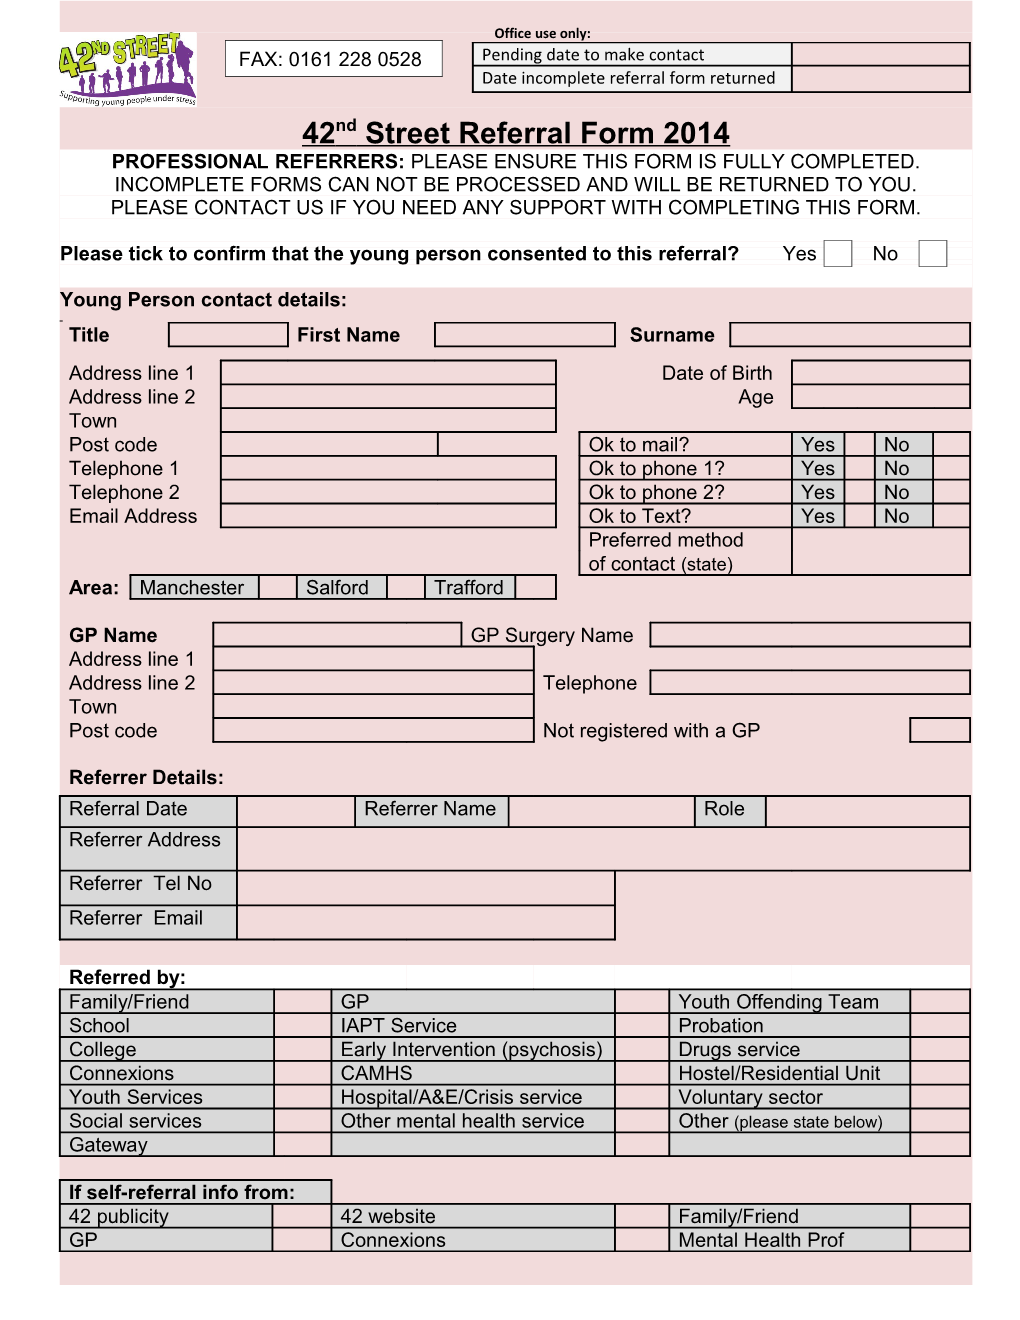 42Nd Street Referral Form